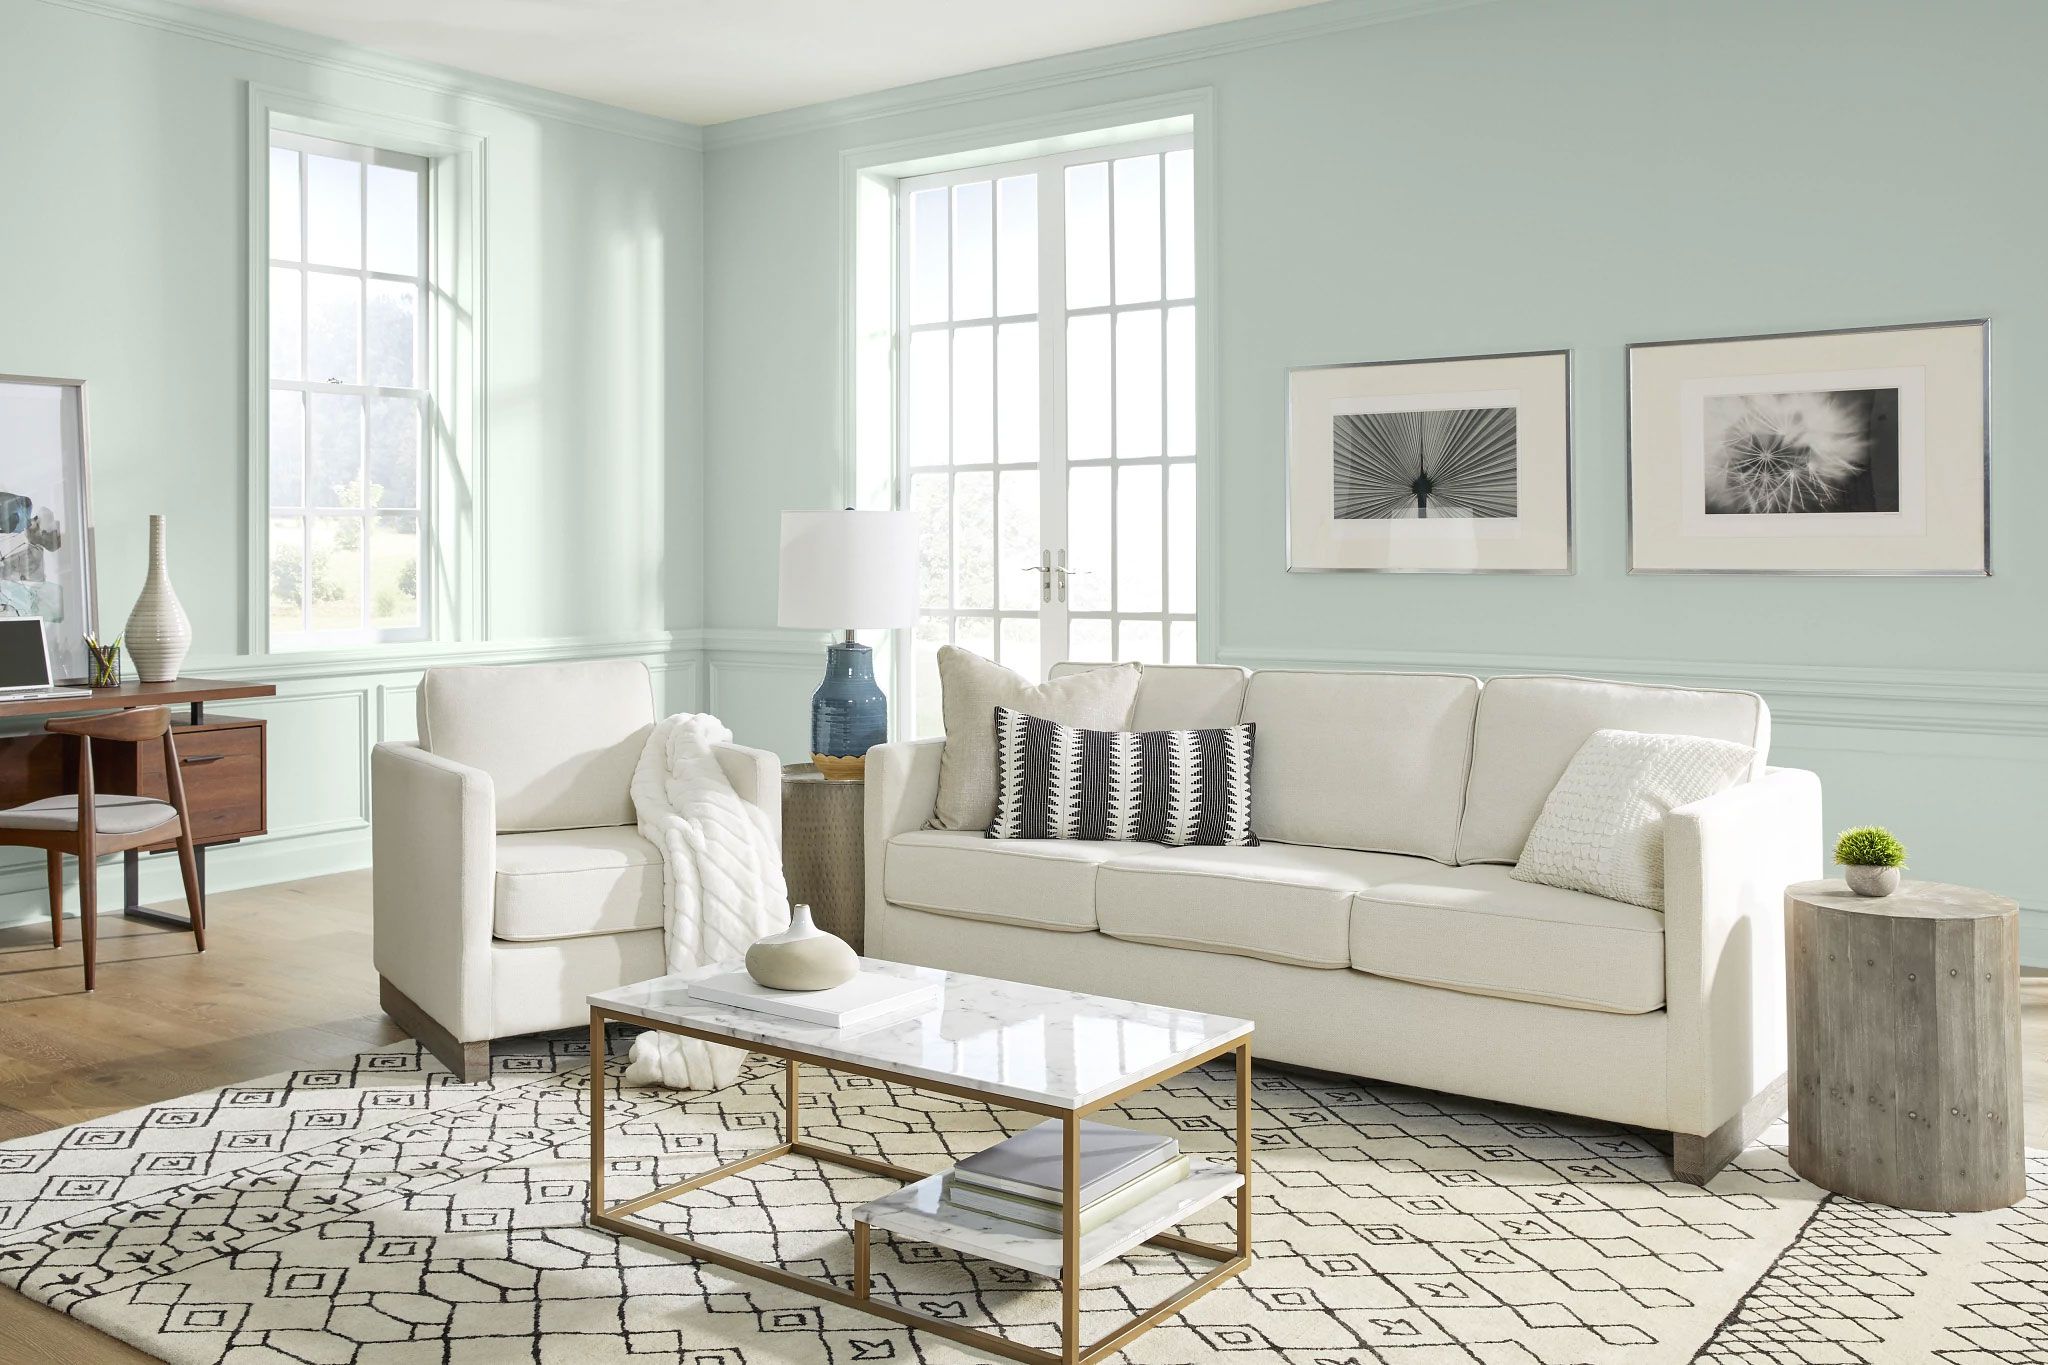 The Color Trends Experts Expect to See Everywhere in 2022